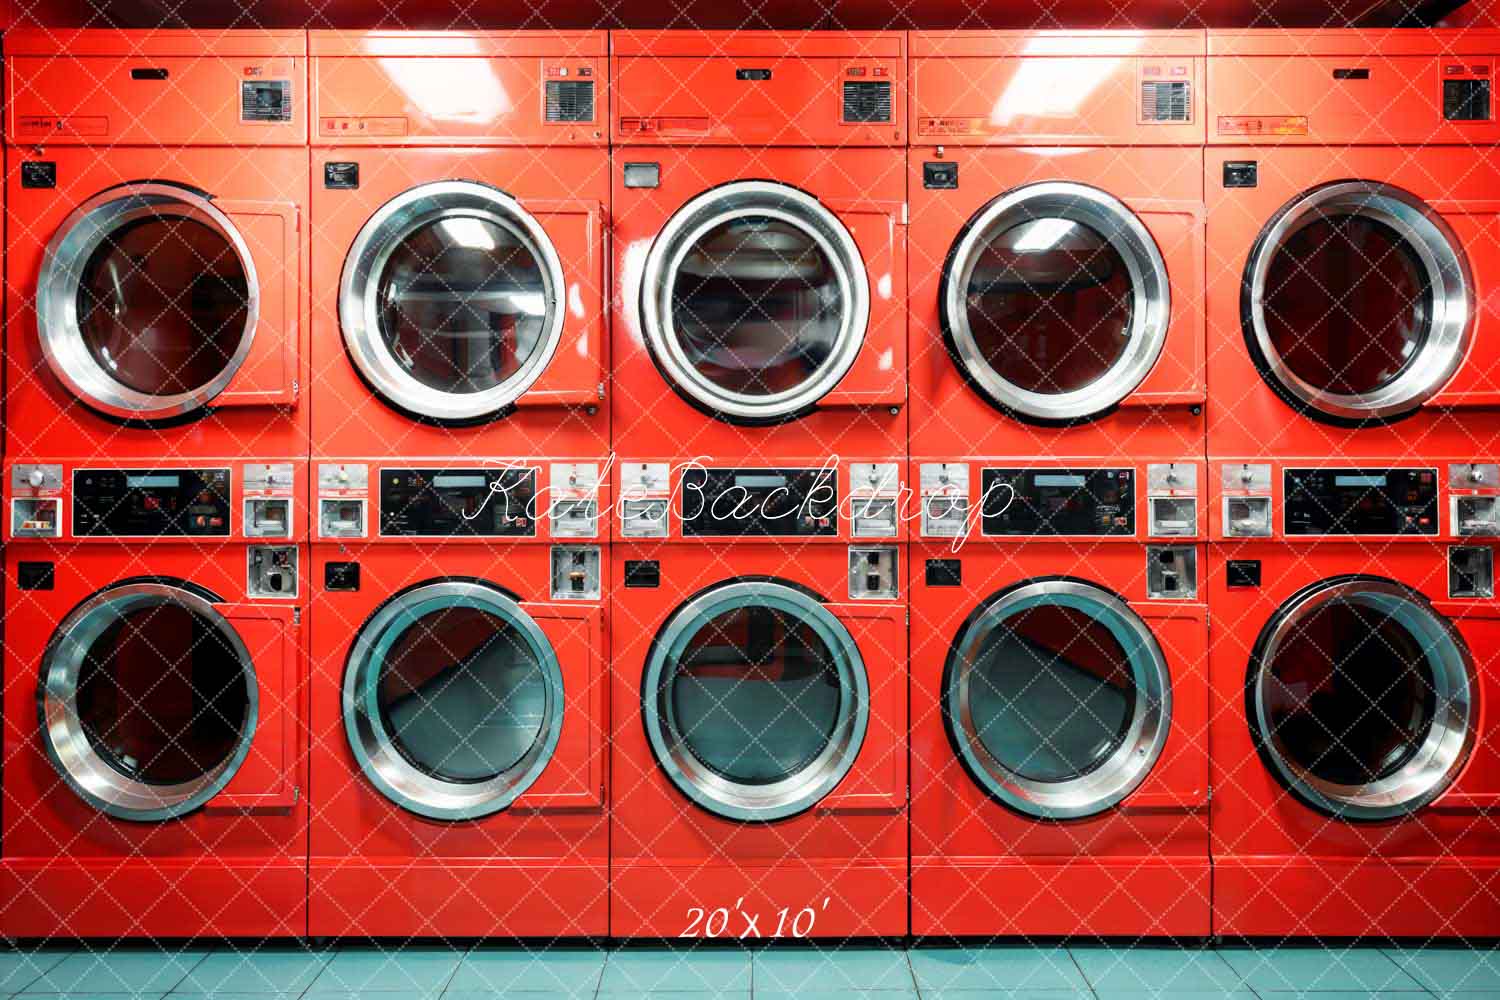 Kate Laundry Day Red Washing Machine Room Backdrop Designed by Emetselch